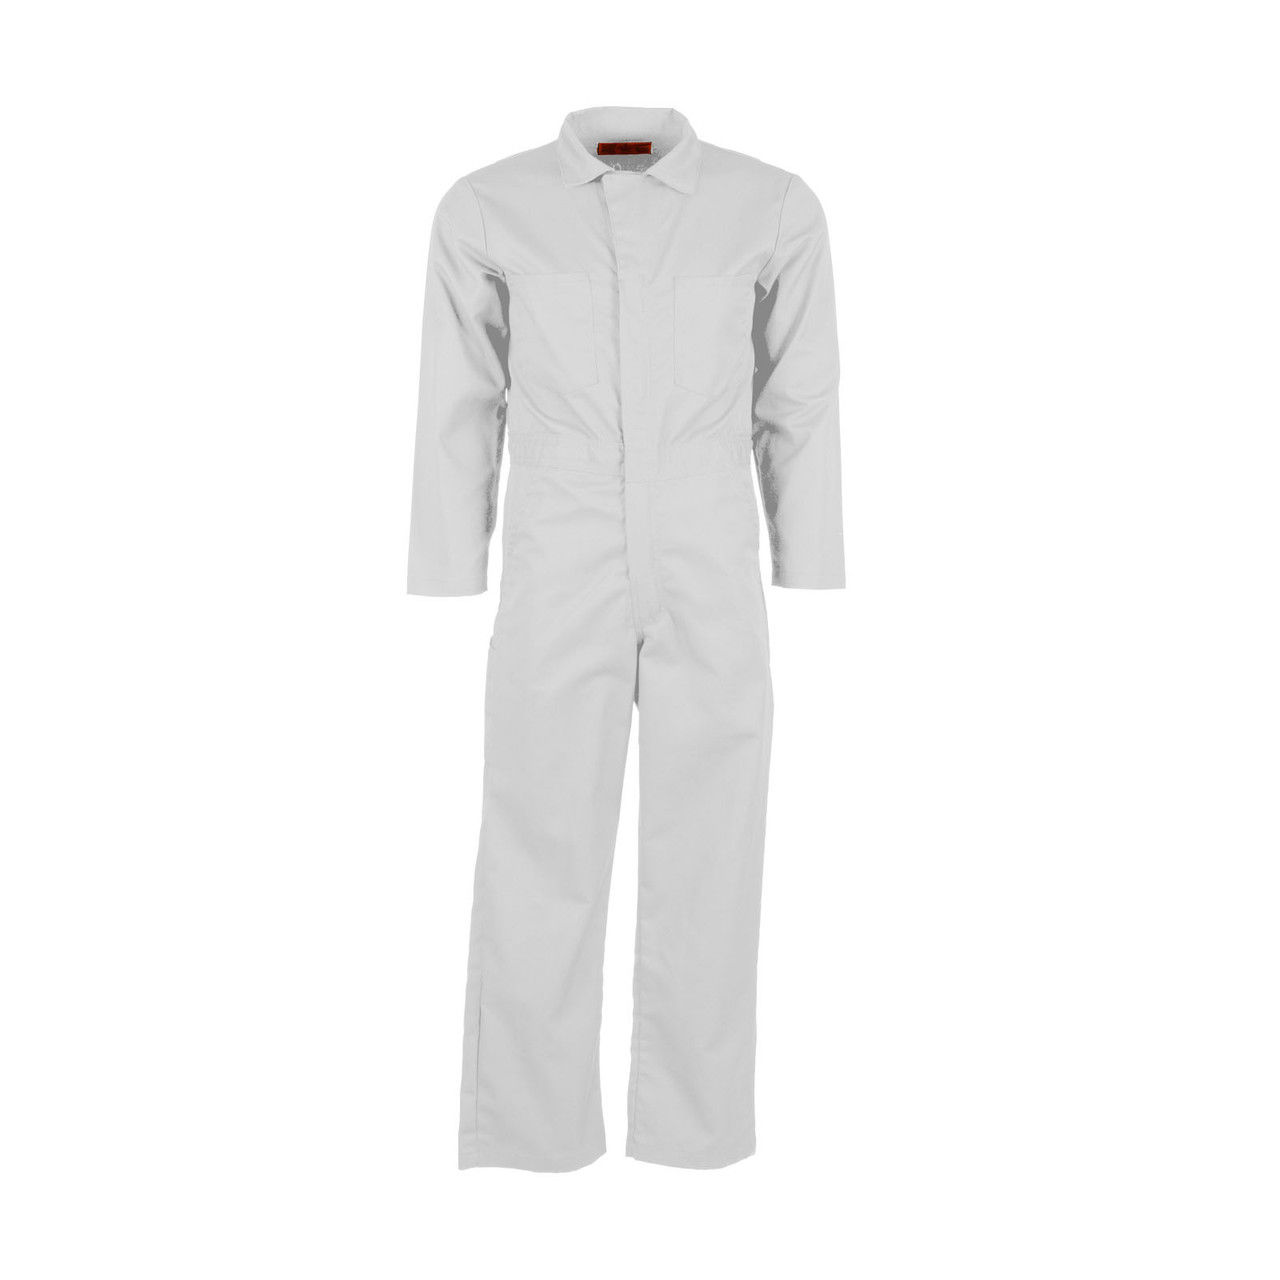 What is the waist range for the white coveralls?